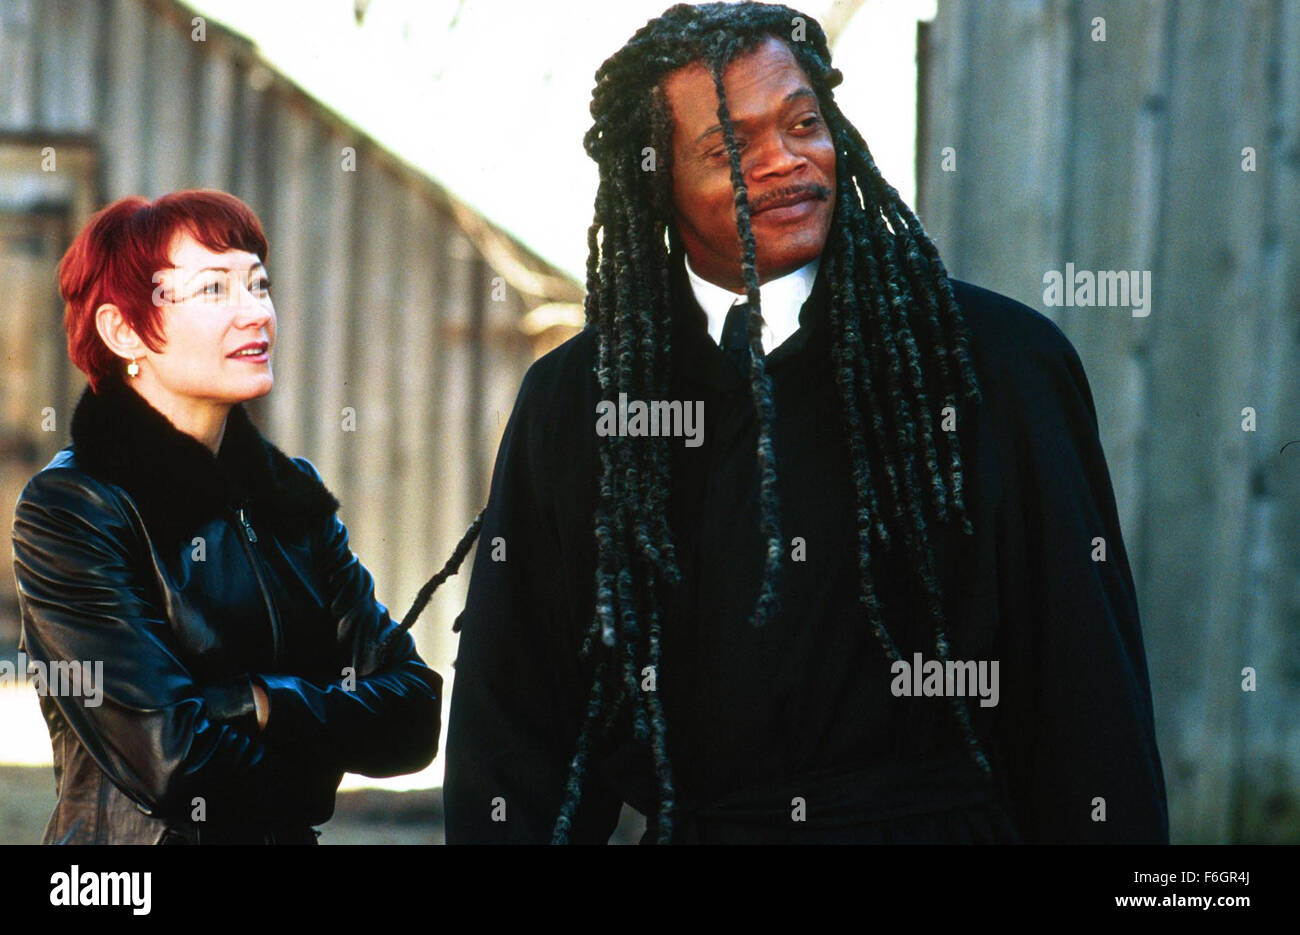 Jan 19, 2001; Los Angeles, CA, USA; Actor SAMUEL L. JACKSON stars as Romulus Ledbetter and actress ANN MAGNUSON as Moira Leppenraub in the Arroyo Pictures drama, 'The Caveman's Valentine.' Stock Photo